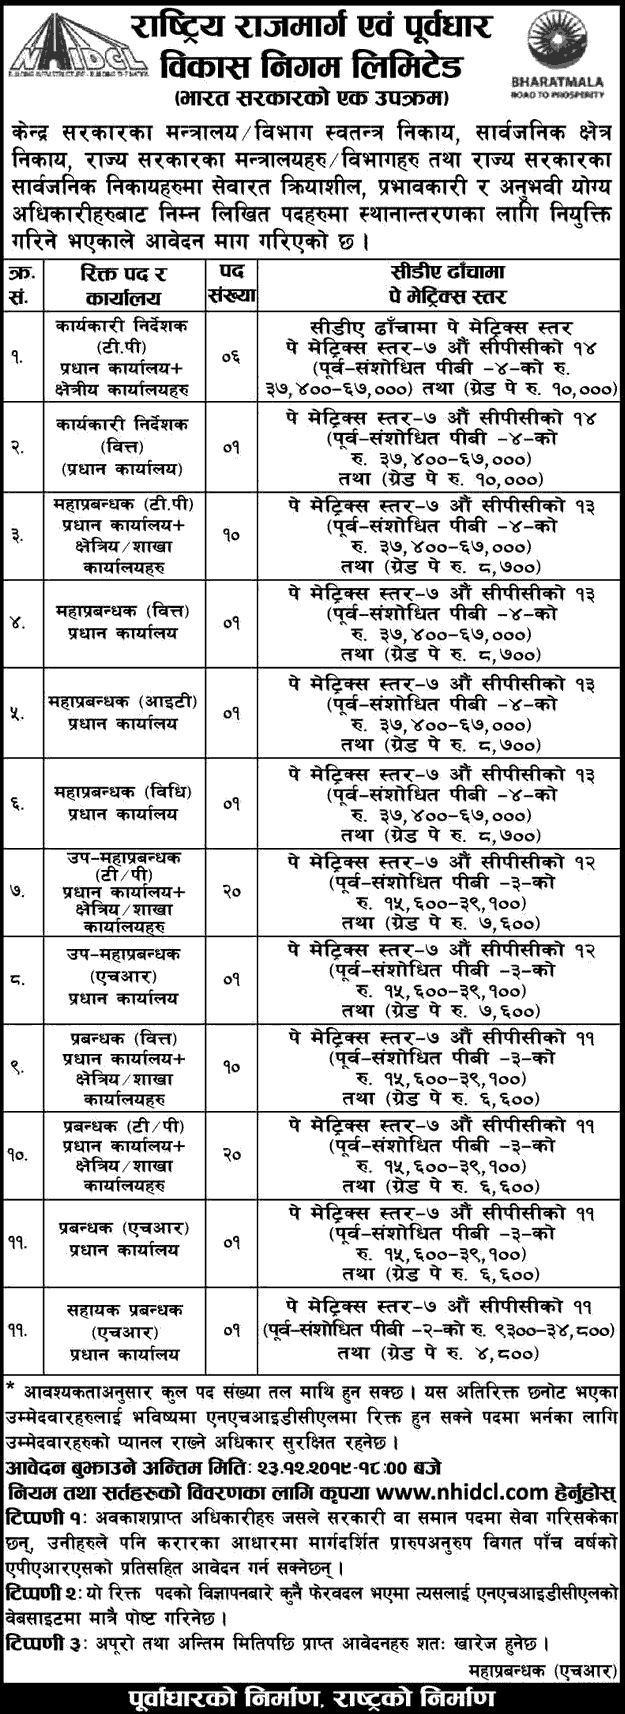 National Highways and Infrastructure Development Corporation Limited (NHLDCL) Nepal